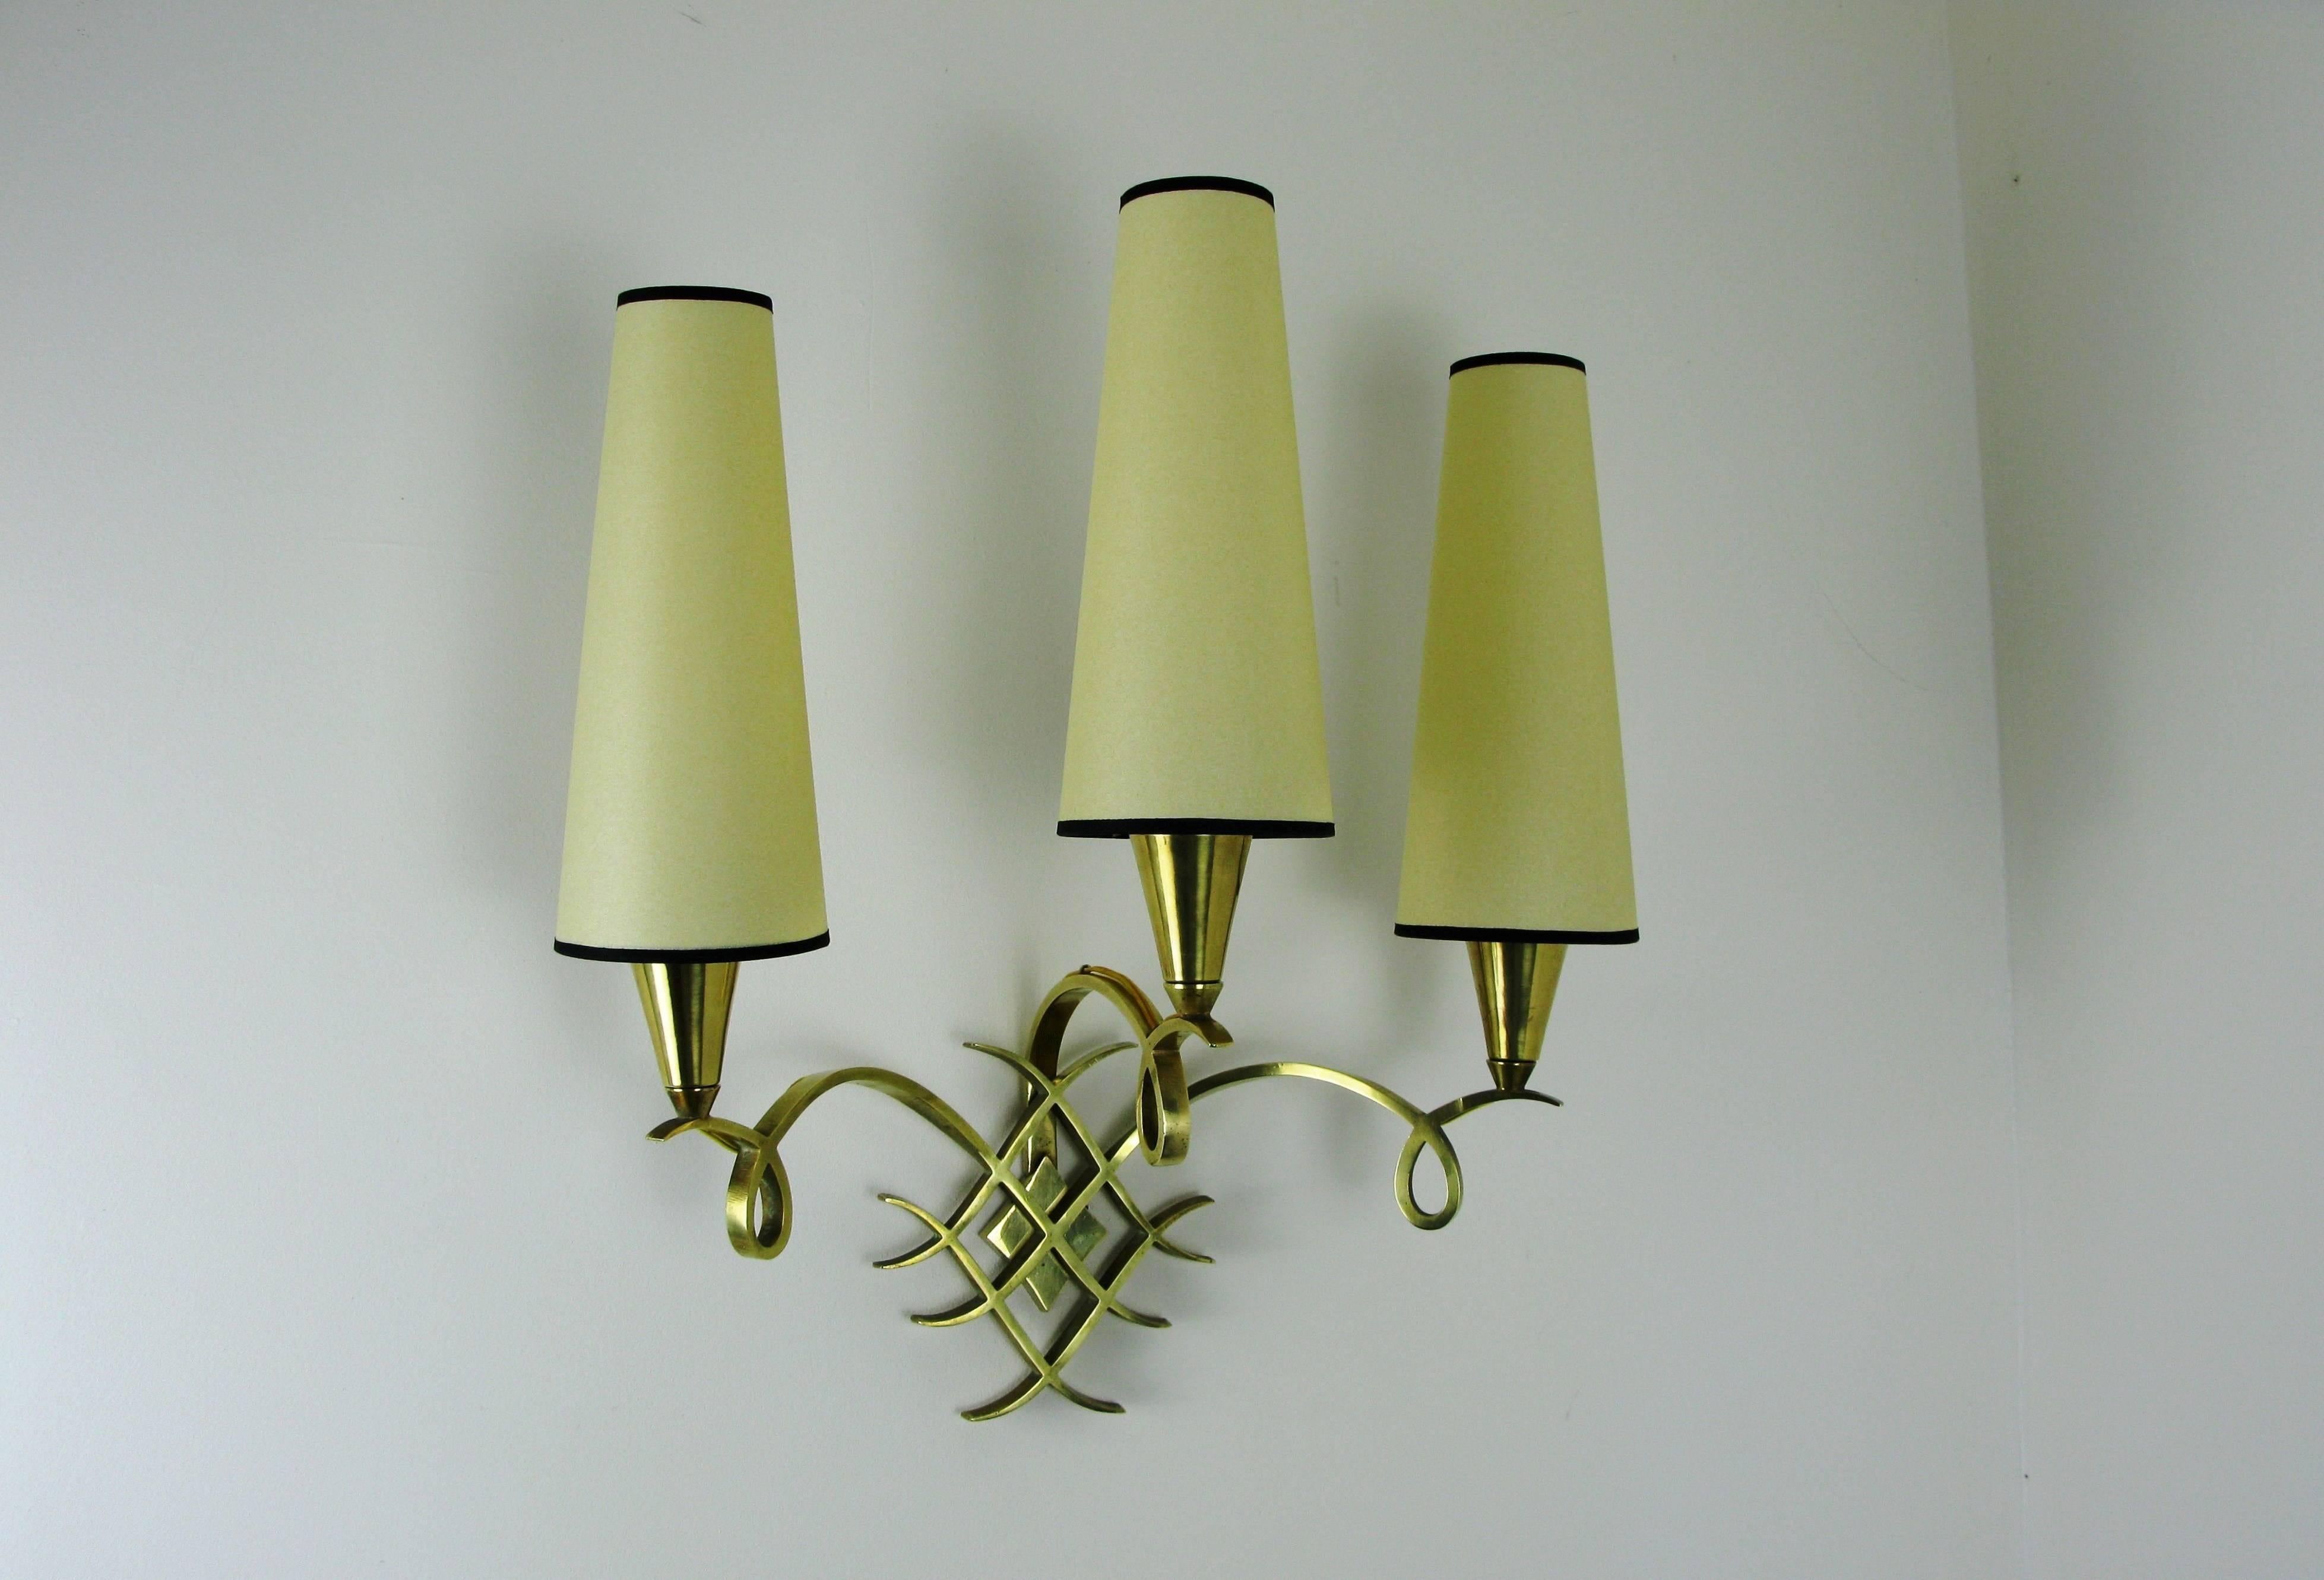 Large pair of polished bronze sconces consisting of a school of three polished bronze lighted arms surmounted by three brass cups holding a conical lampshade bordered with a black line.
The arms are joined to a bronze wreathed mounting.
Lampshades